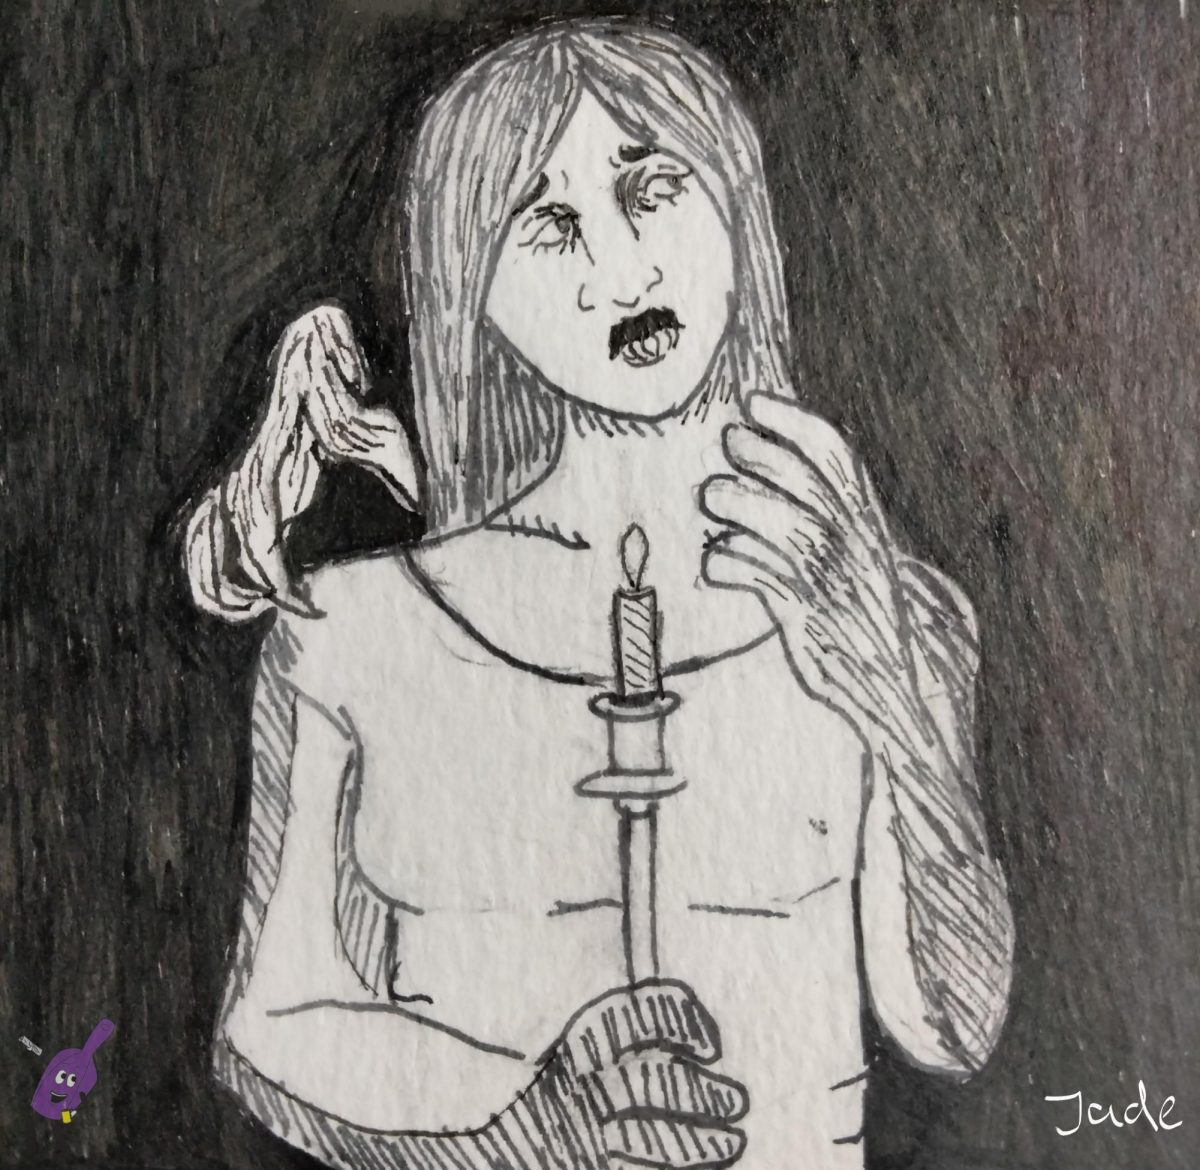 A traditionally drawn image of a girl in the shadows, guiding a candle through the darkness. A ghosts hand reaches up behind her.